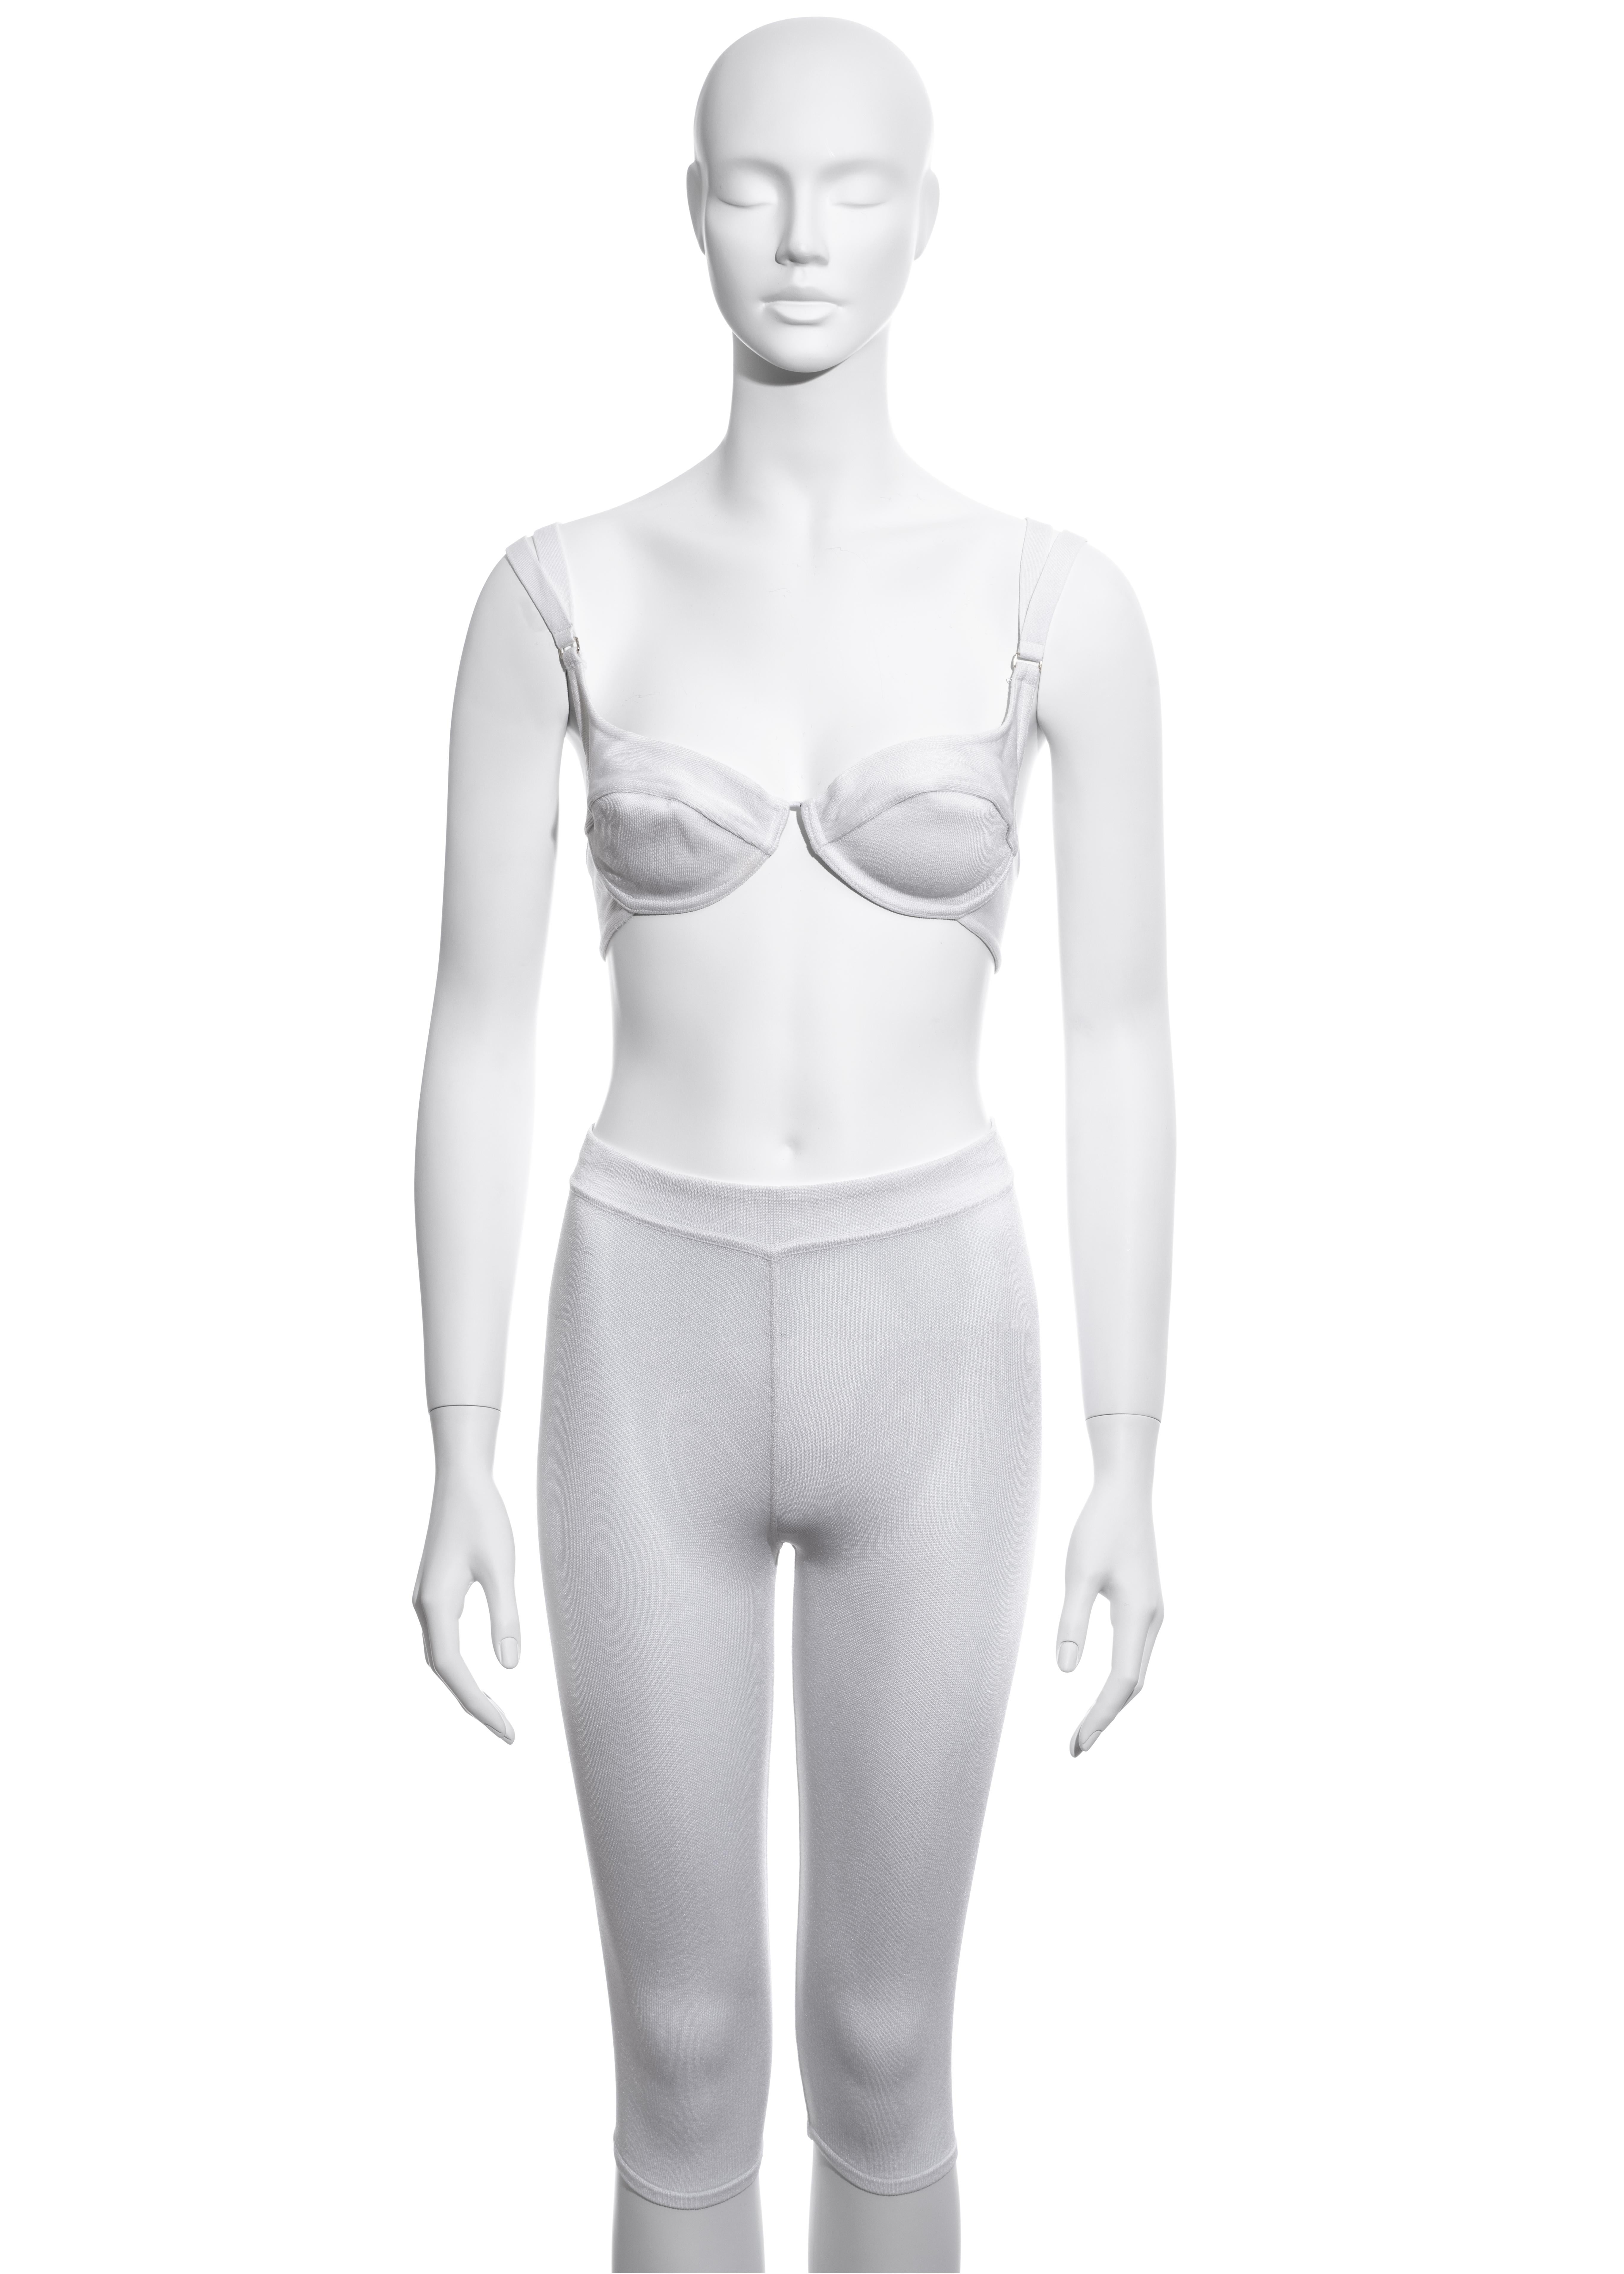 ▪ White rayon spandex 
▪ Underwire bra with adjustable doubled shoulder straps 
▪ High-waisted three-quarter length cycling shorts 
▪ Extra Small
▪ Spring-Summer 1990